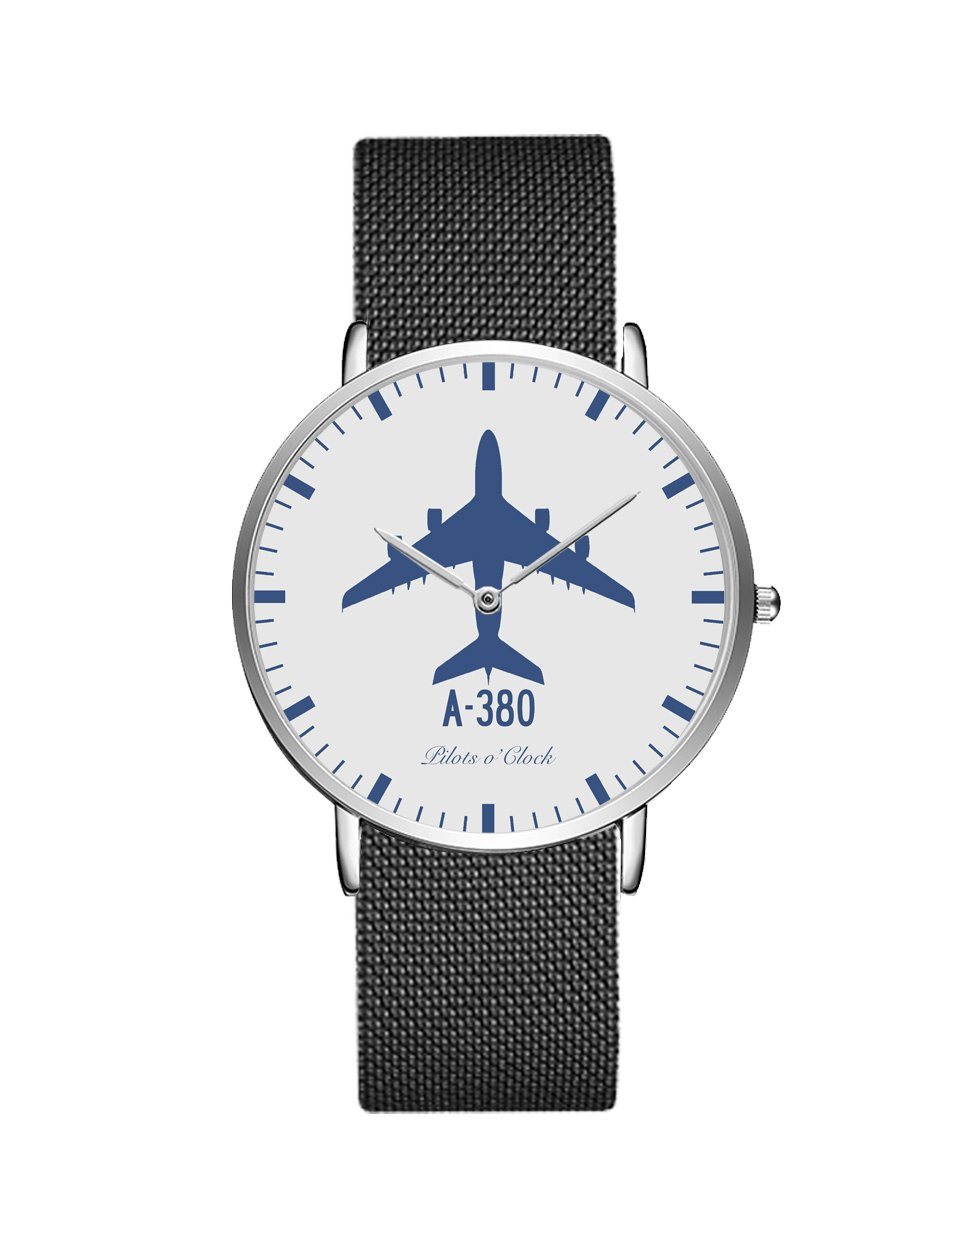 Airbus A380 Stainless Steel Strap Watches Pilot Eyes Store Silver & Black Stainless Steel Strap 